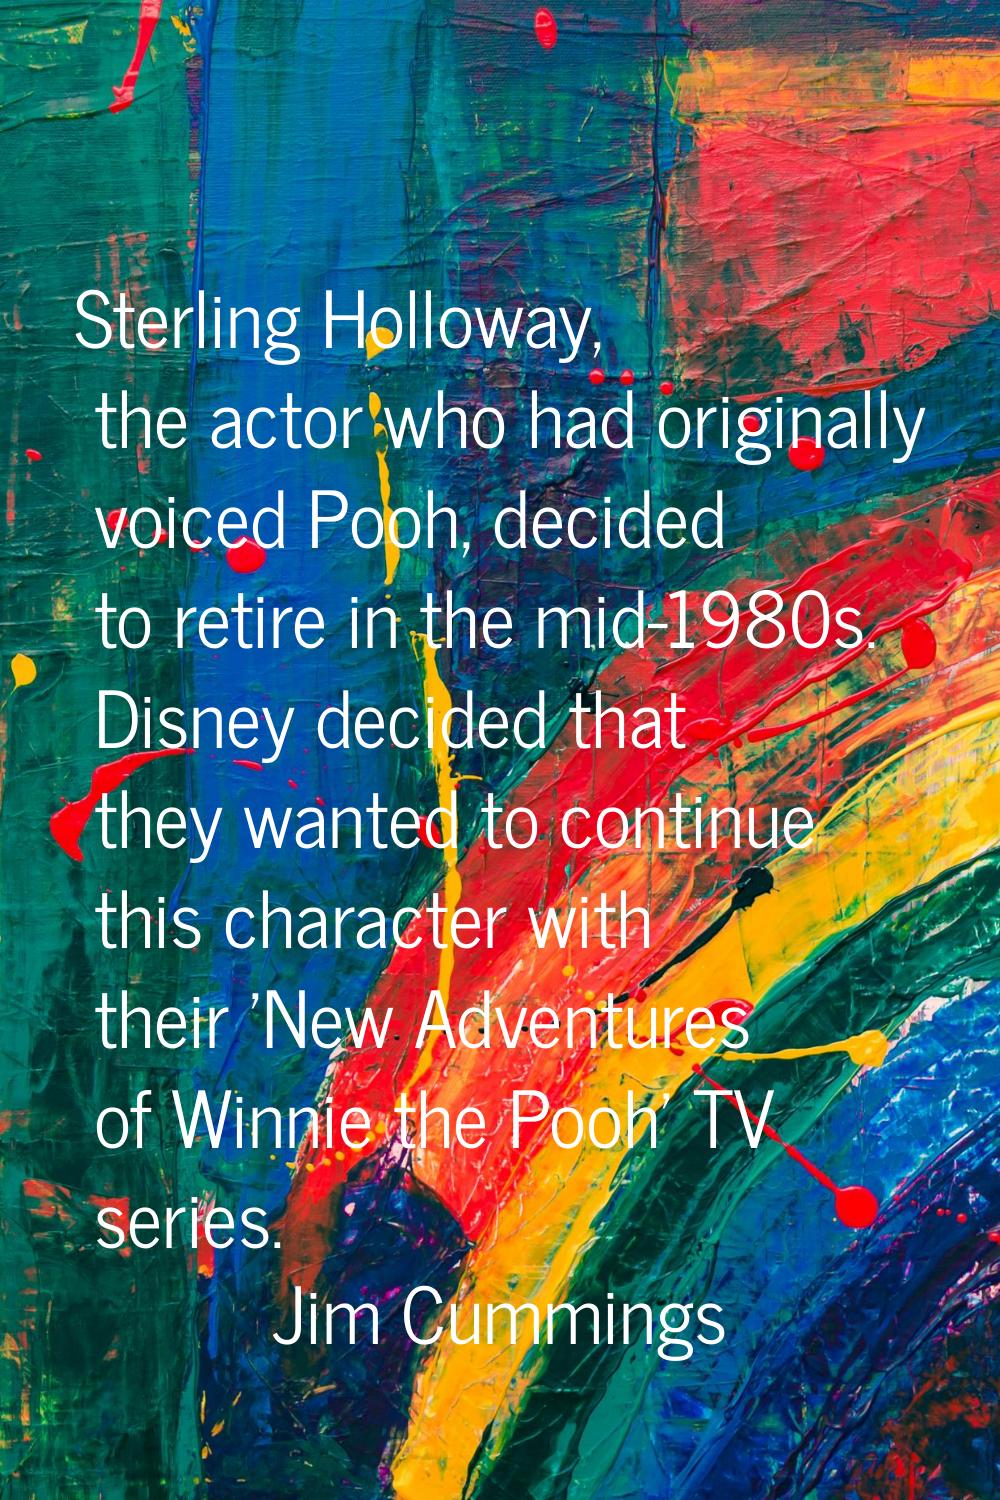 Sterling Holloway, the actor who had originally voiced Pooh, decided to retire in the mid-1980s. Di